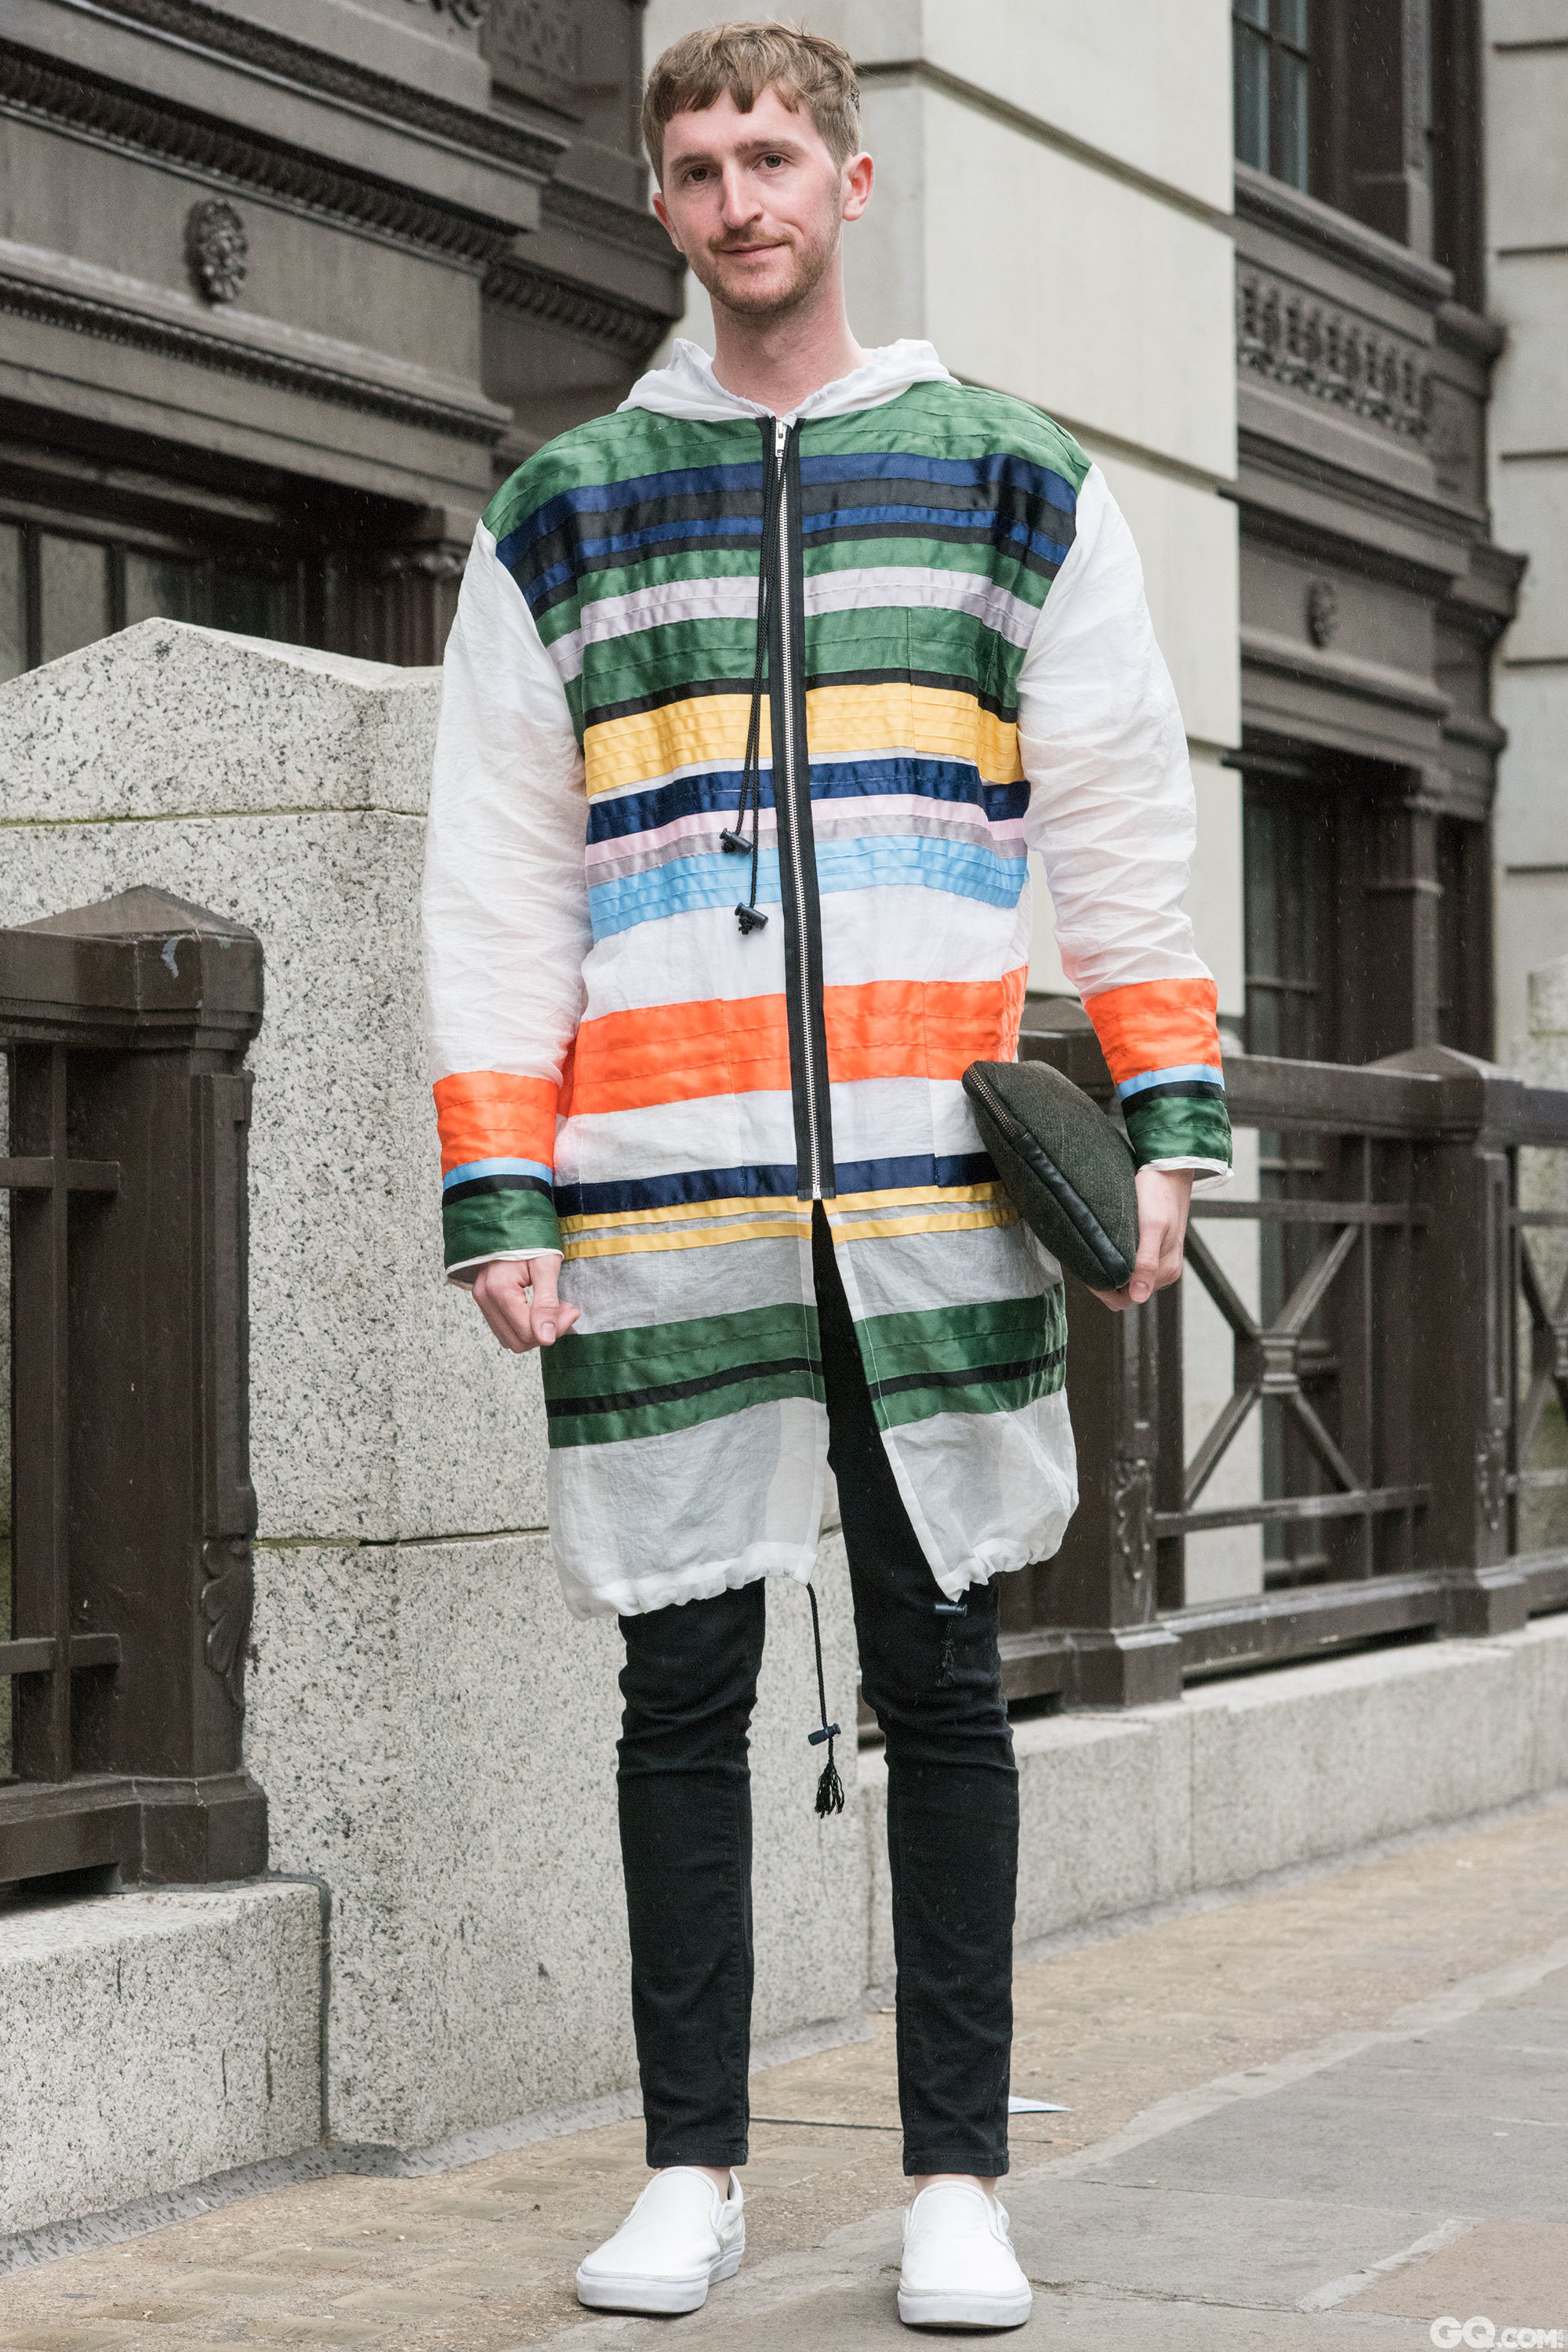 Graham
Jacket: Joseph Terby
Jeans: Acne
Shoes: Vanz
Clutch: Paige

Inspiration: As it is a little chilly today, I think a colorful coat is always interesting. 因为今天有点冷，所以我觉得一件多彩的外套一定很有趣。